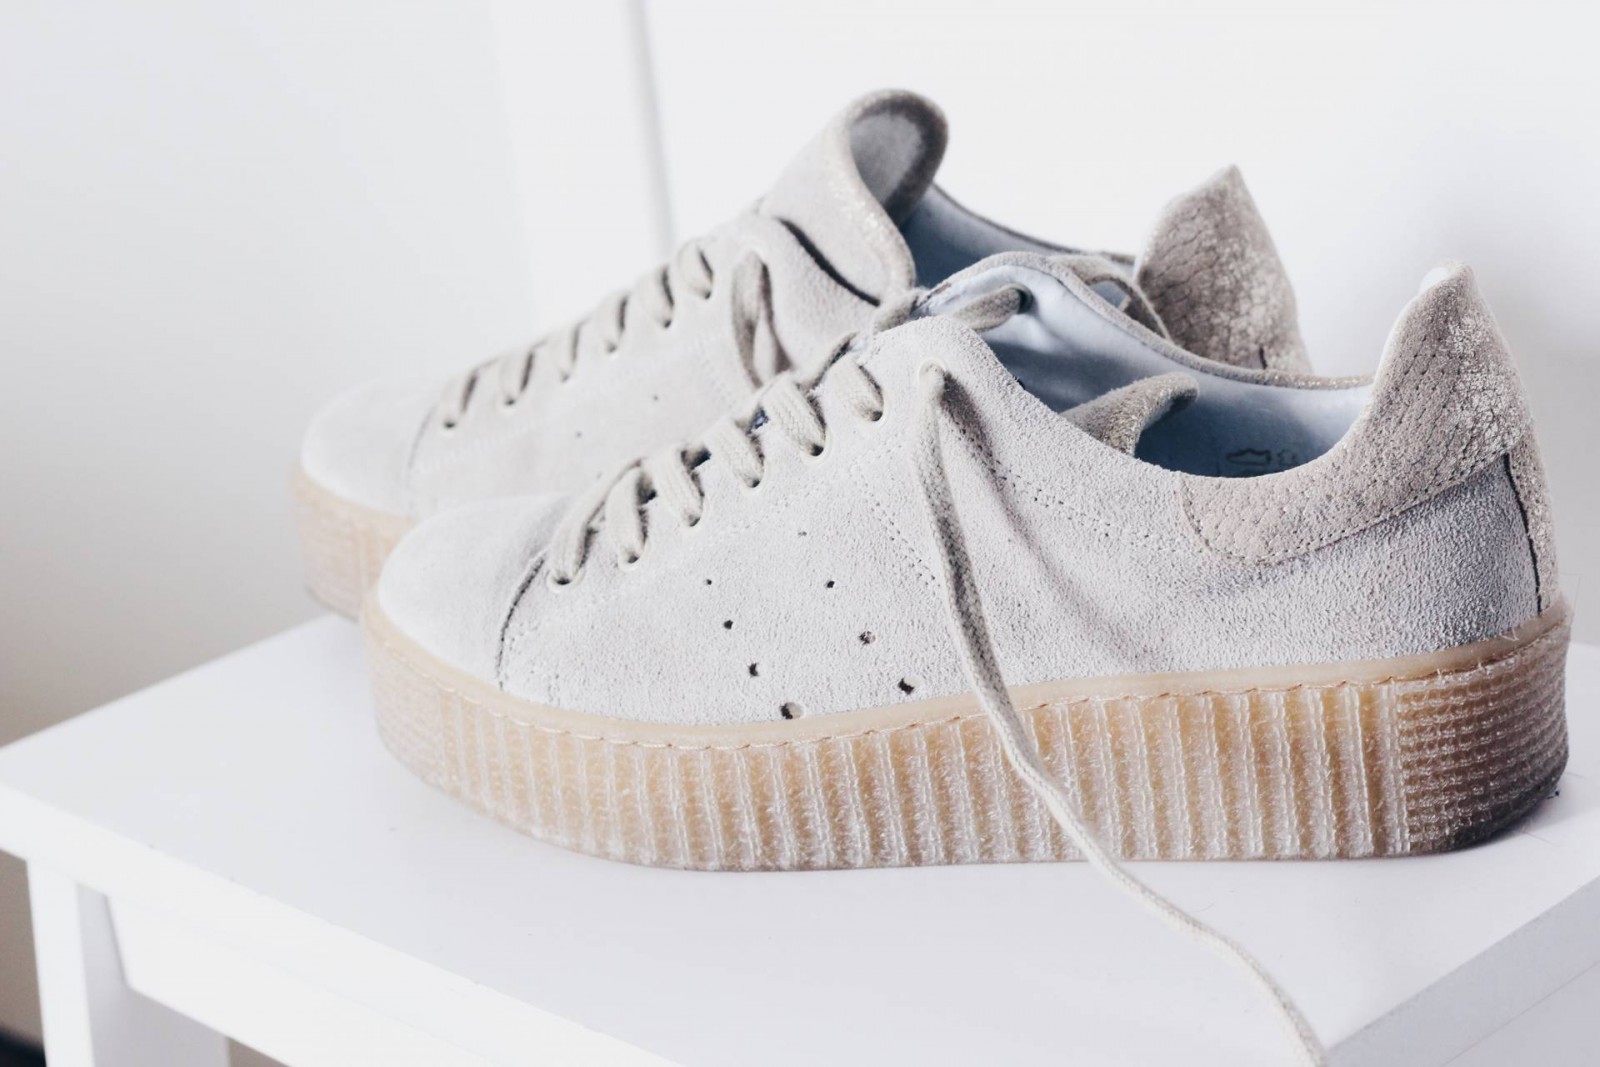 Detective scherm Vijandig New in: Look-a-like Rihanna for Puma creepers - OurFavourites